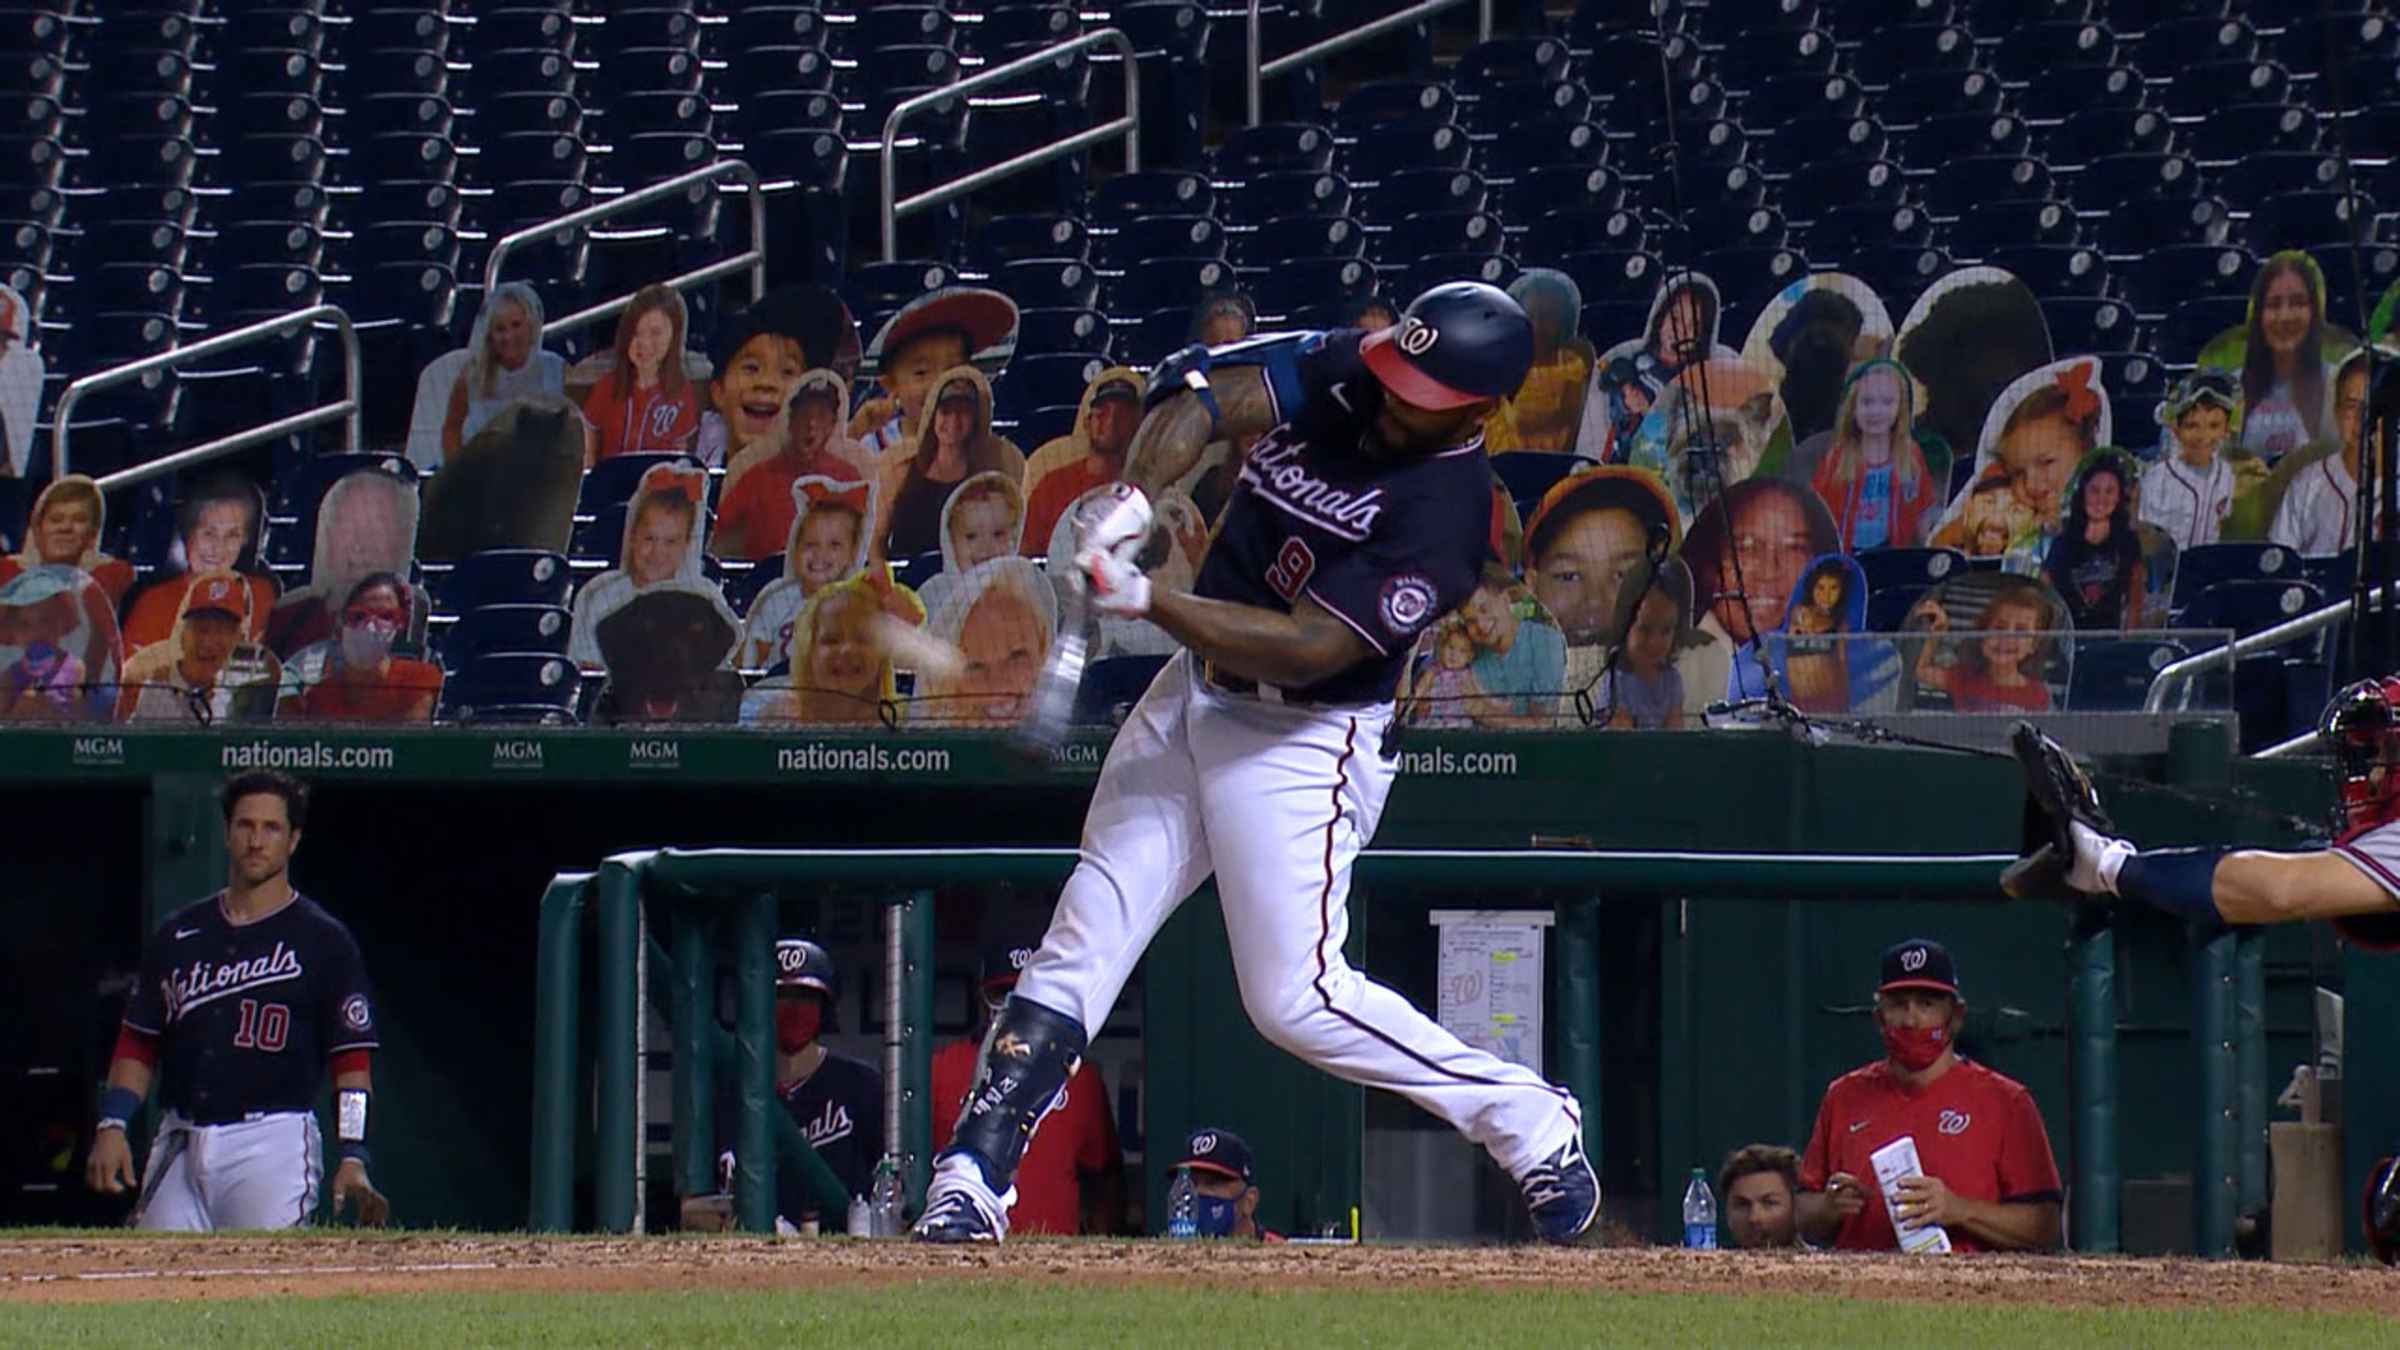 Eric Thames' 13th home run of the season was capped off with some  celebratory camera time